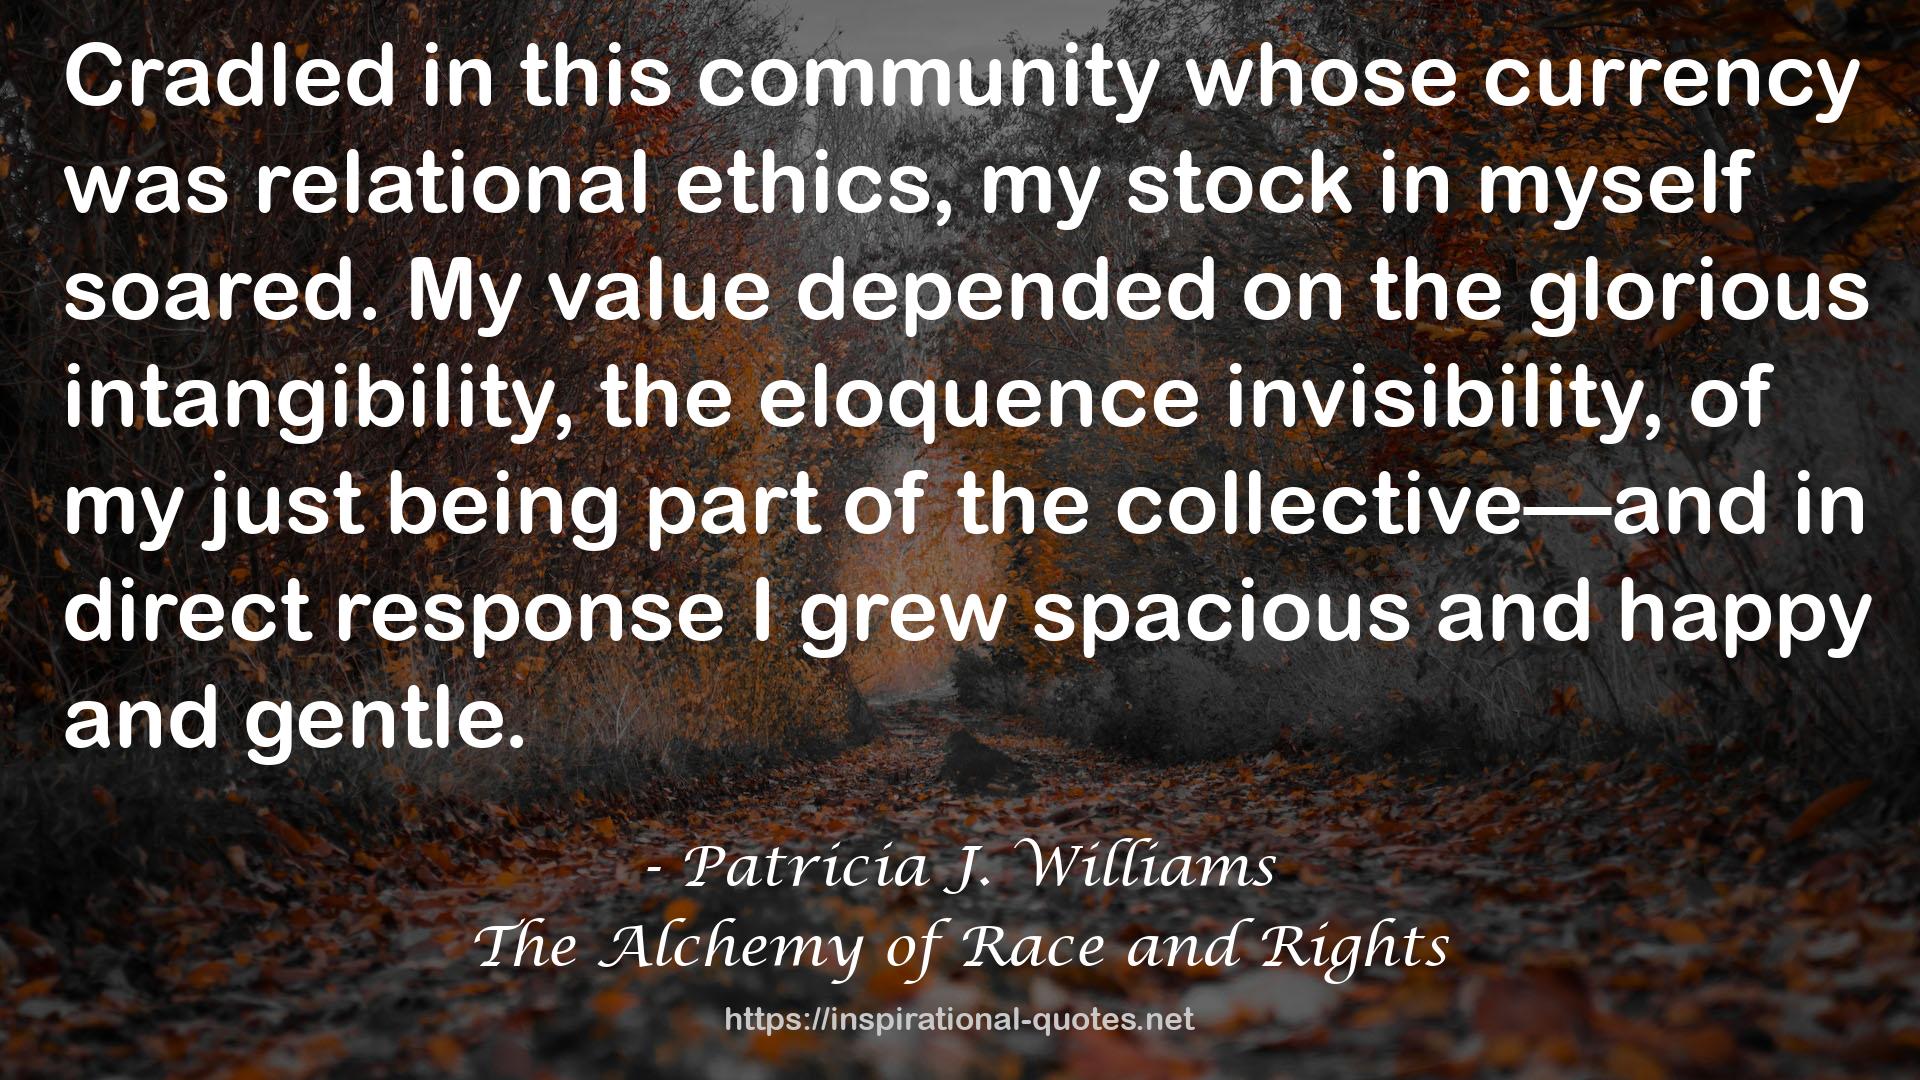 The Alchemy of Race and Rights QUOTES